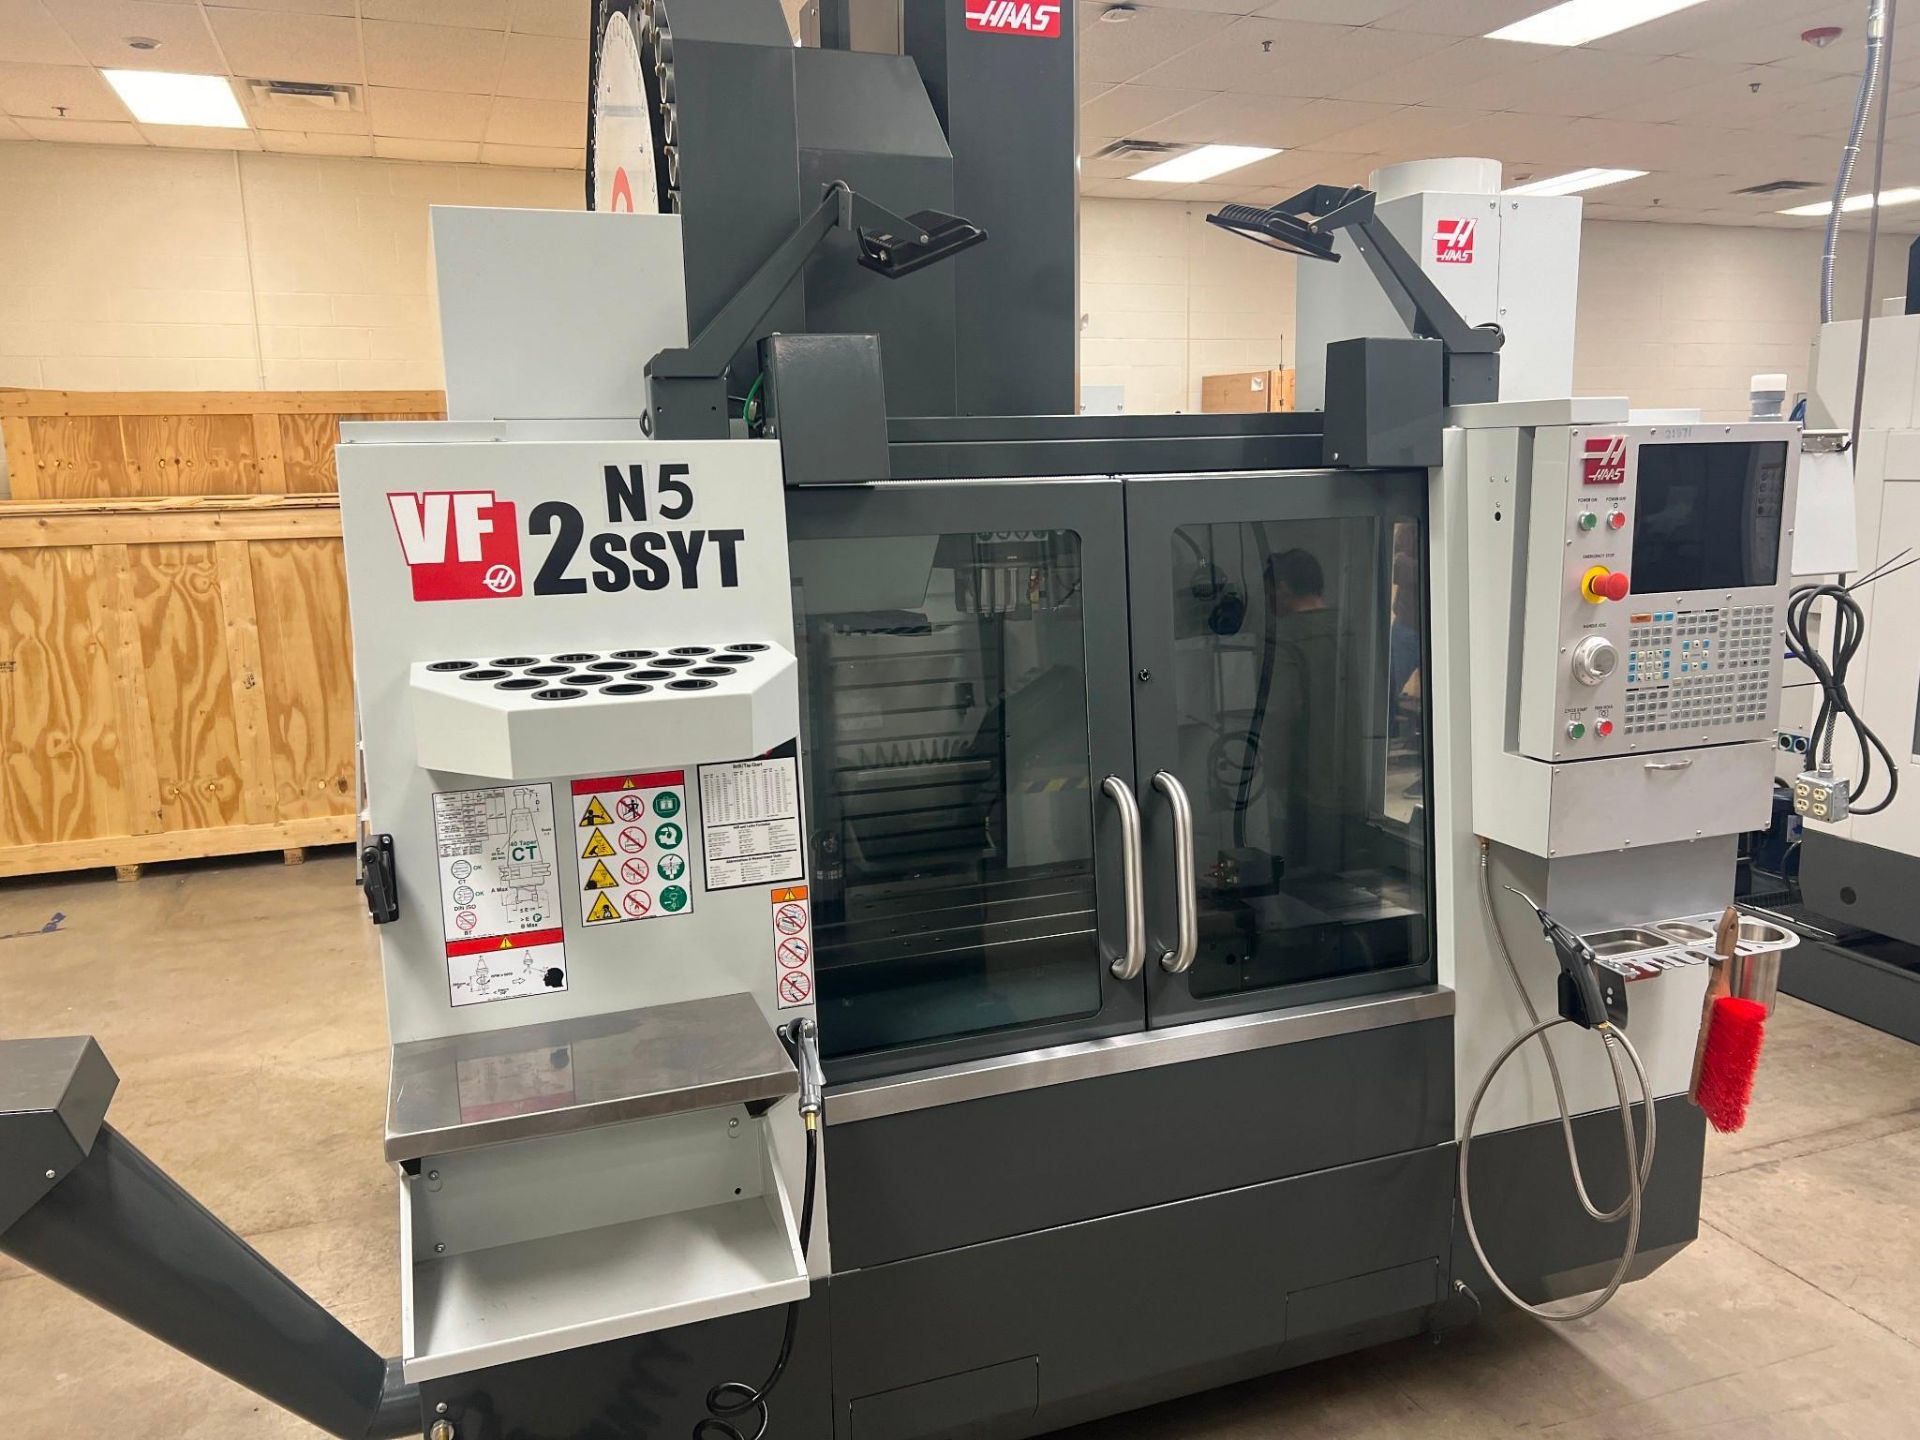 HAAS VF-2SSYT VMC, 2021 - TSC, WIPS, 50+1 SIDE-MOUNT TOOL CHANGER, 4TH AXIS, HSM AND MORE - Image 2 of 13